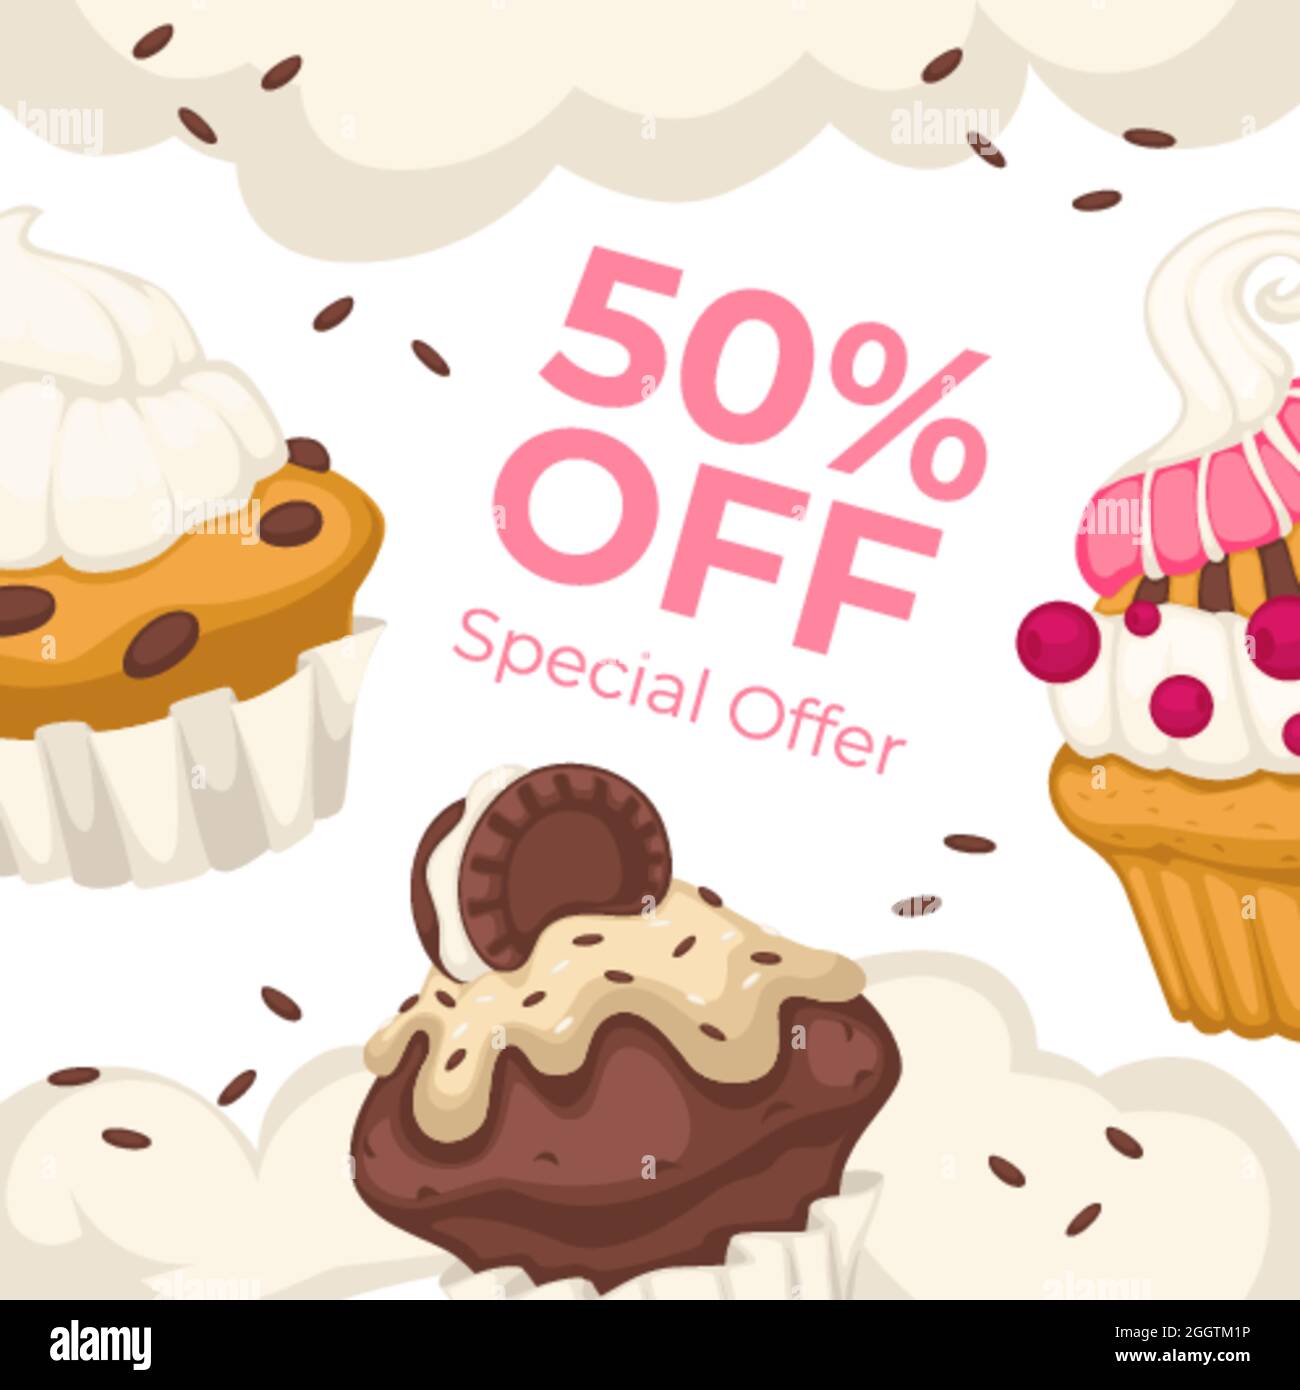 Bakery discounts and offers